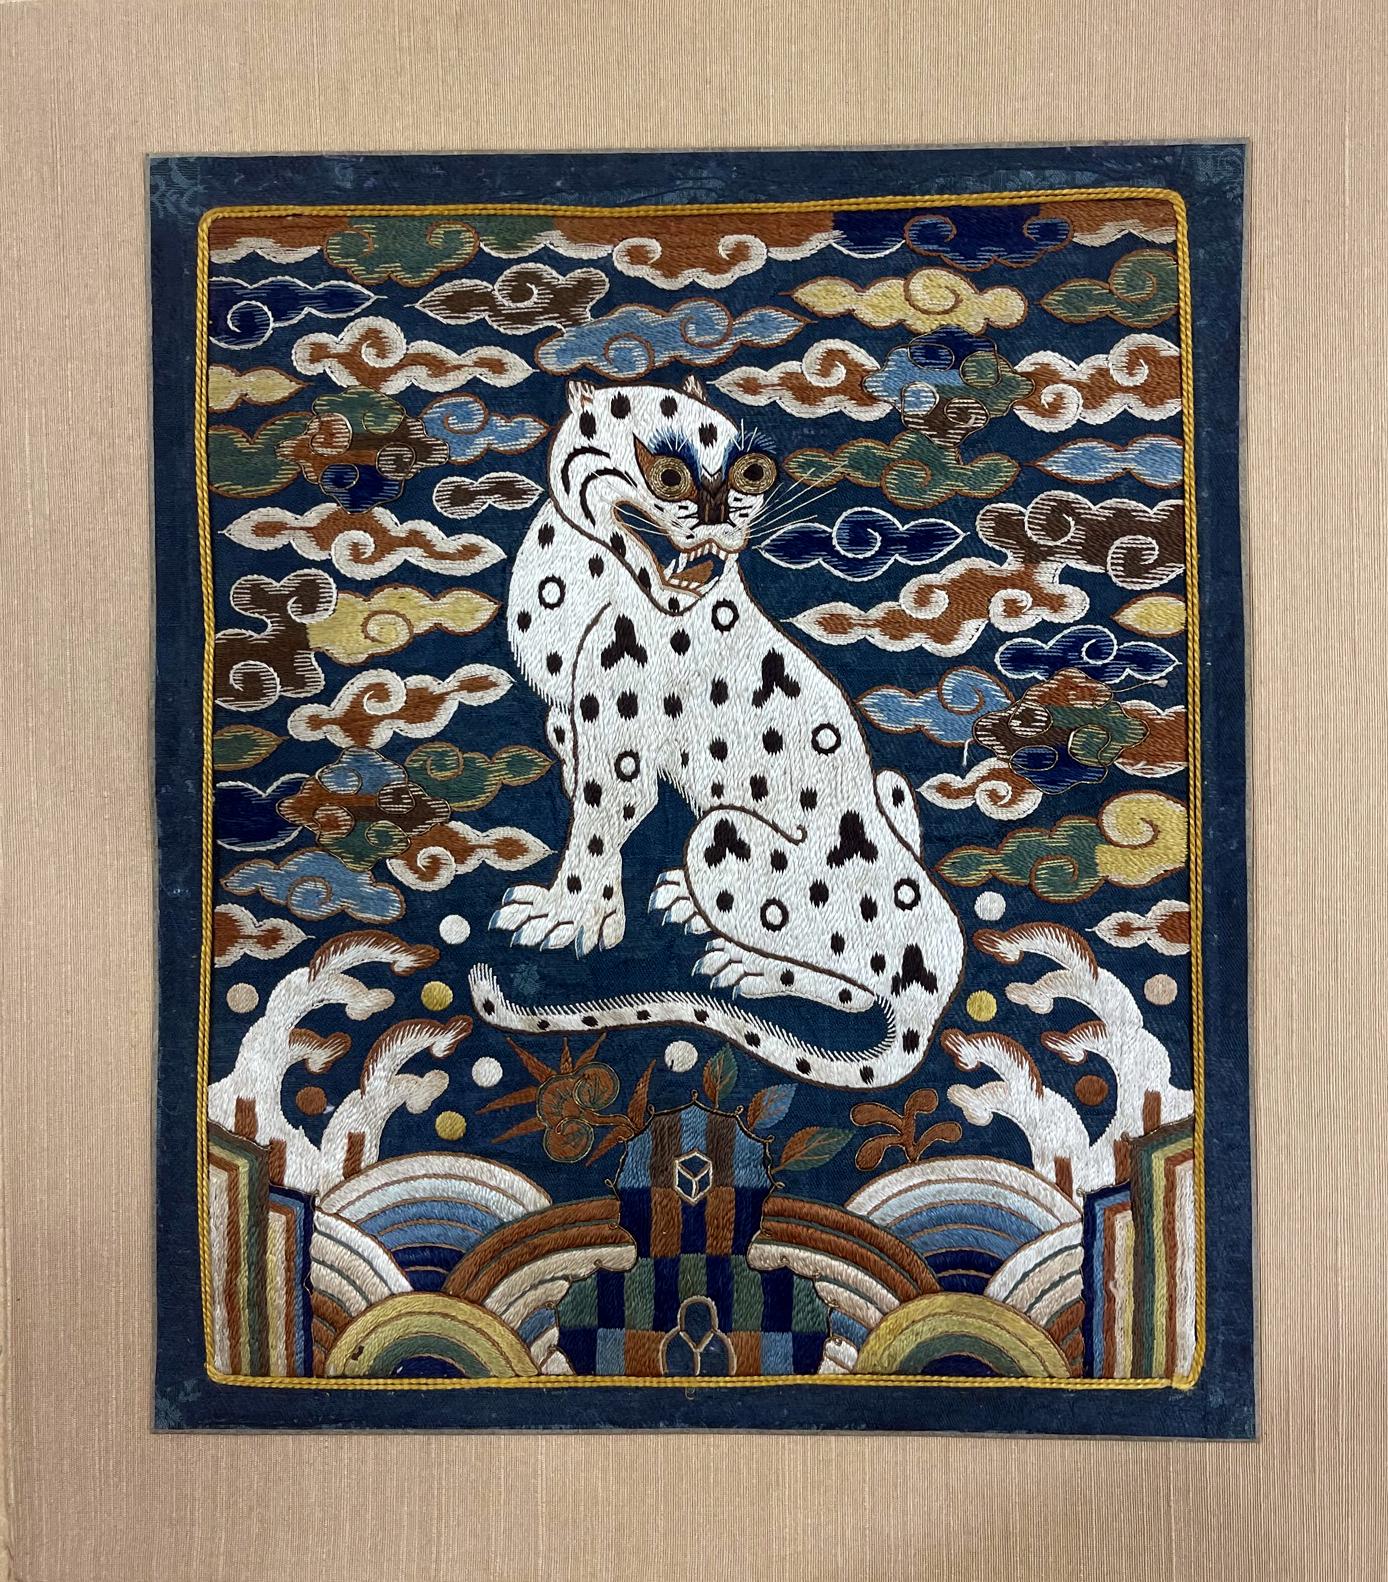 A Korean embroidered silk rank badge (Hyungbae in Korean) from late Joseon Dynasty circa t19th century. One of a fine matching pair, the badge features design of a crouching white tiger- leopards above the Li-sui waves, Lingzi longevity mushroom,